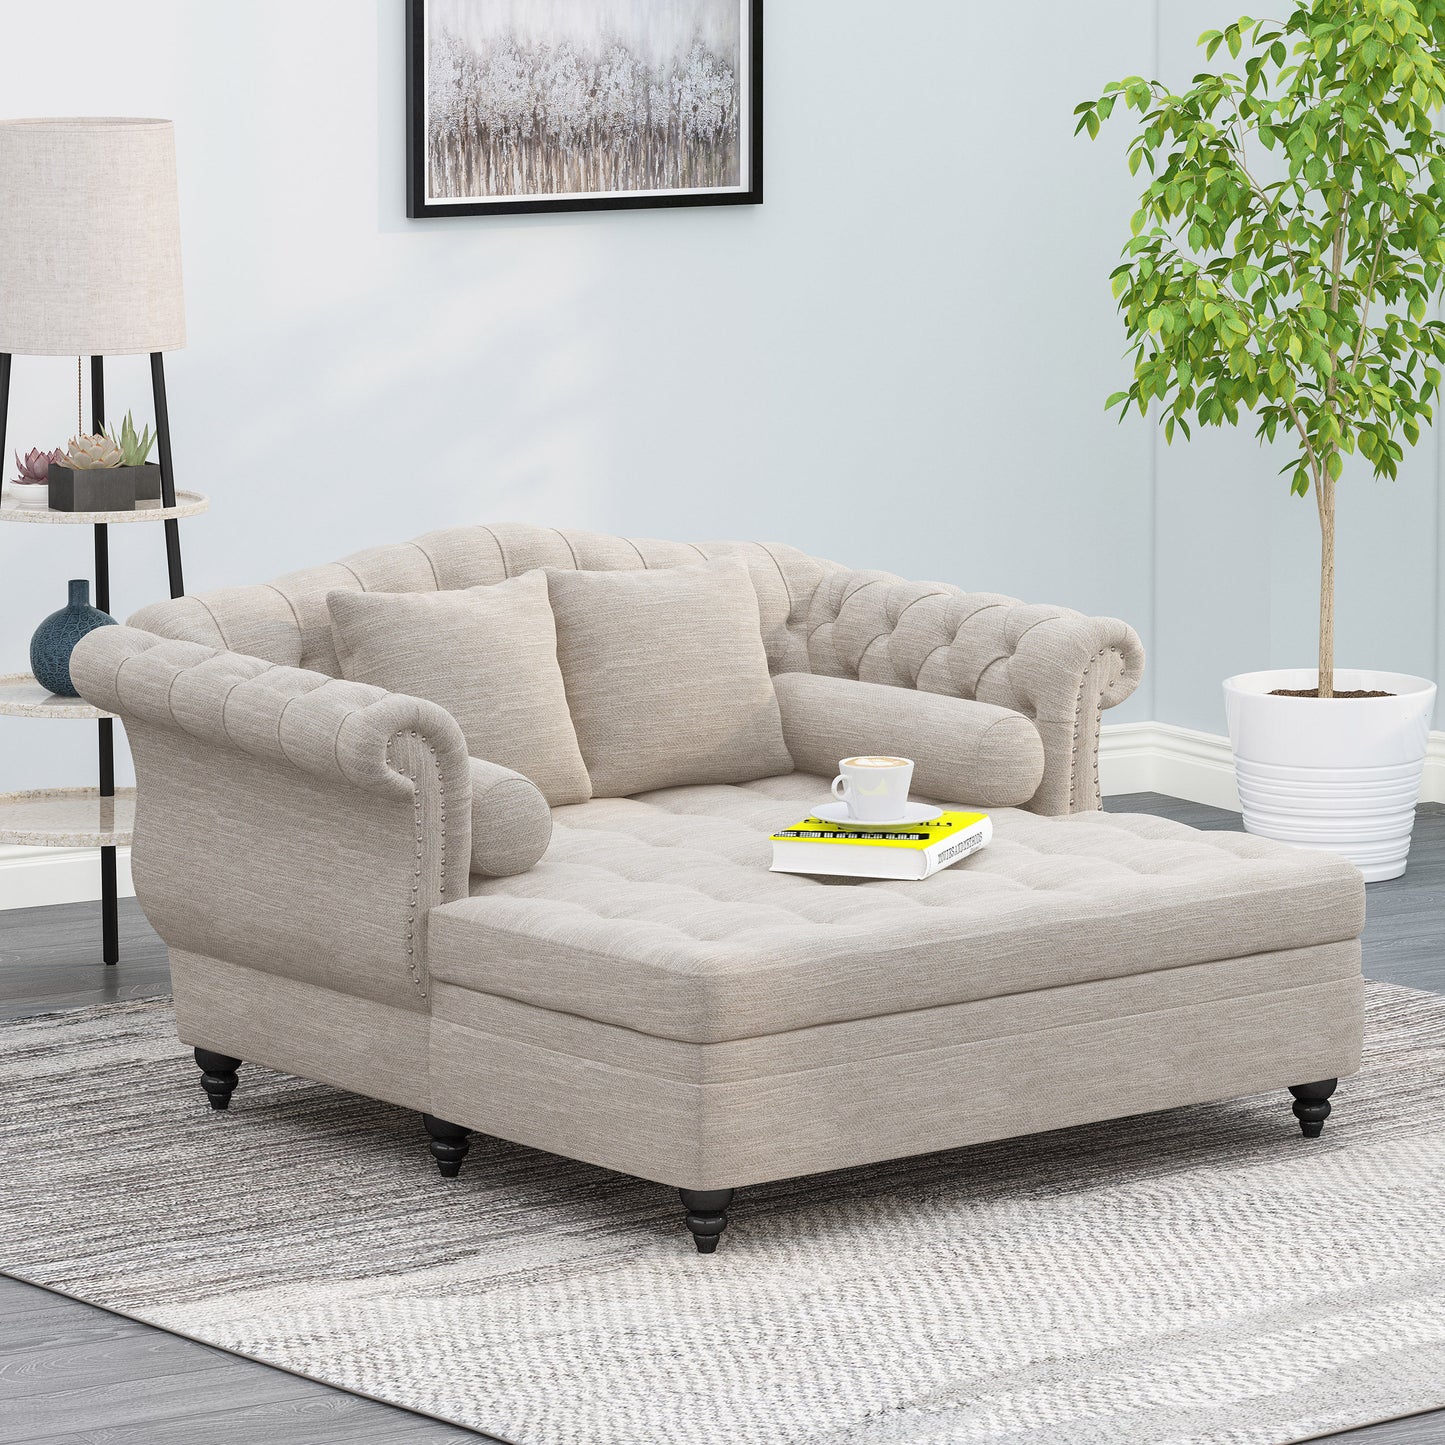 B Contemporary Tufted Double Chaise Lounge With Accent Pillows Gdfstudio